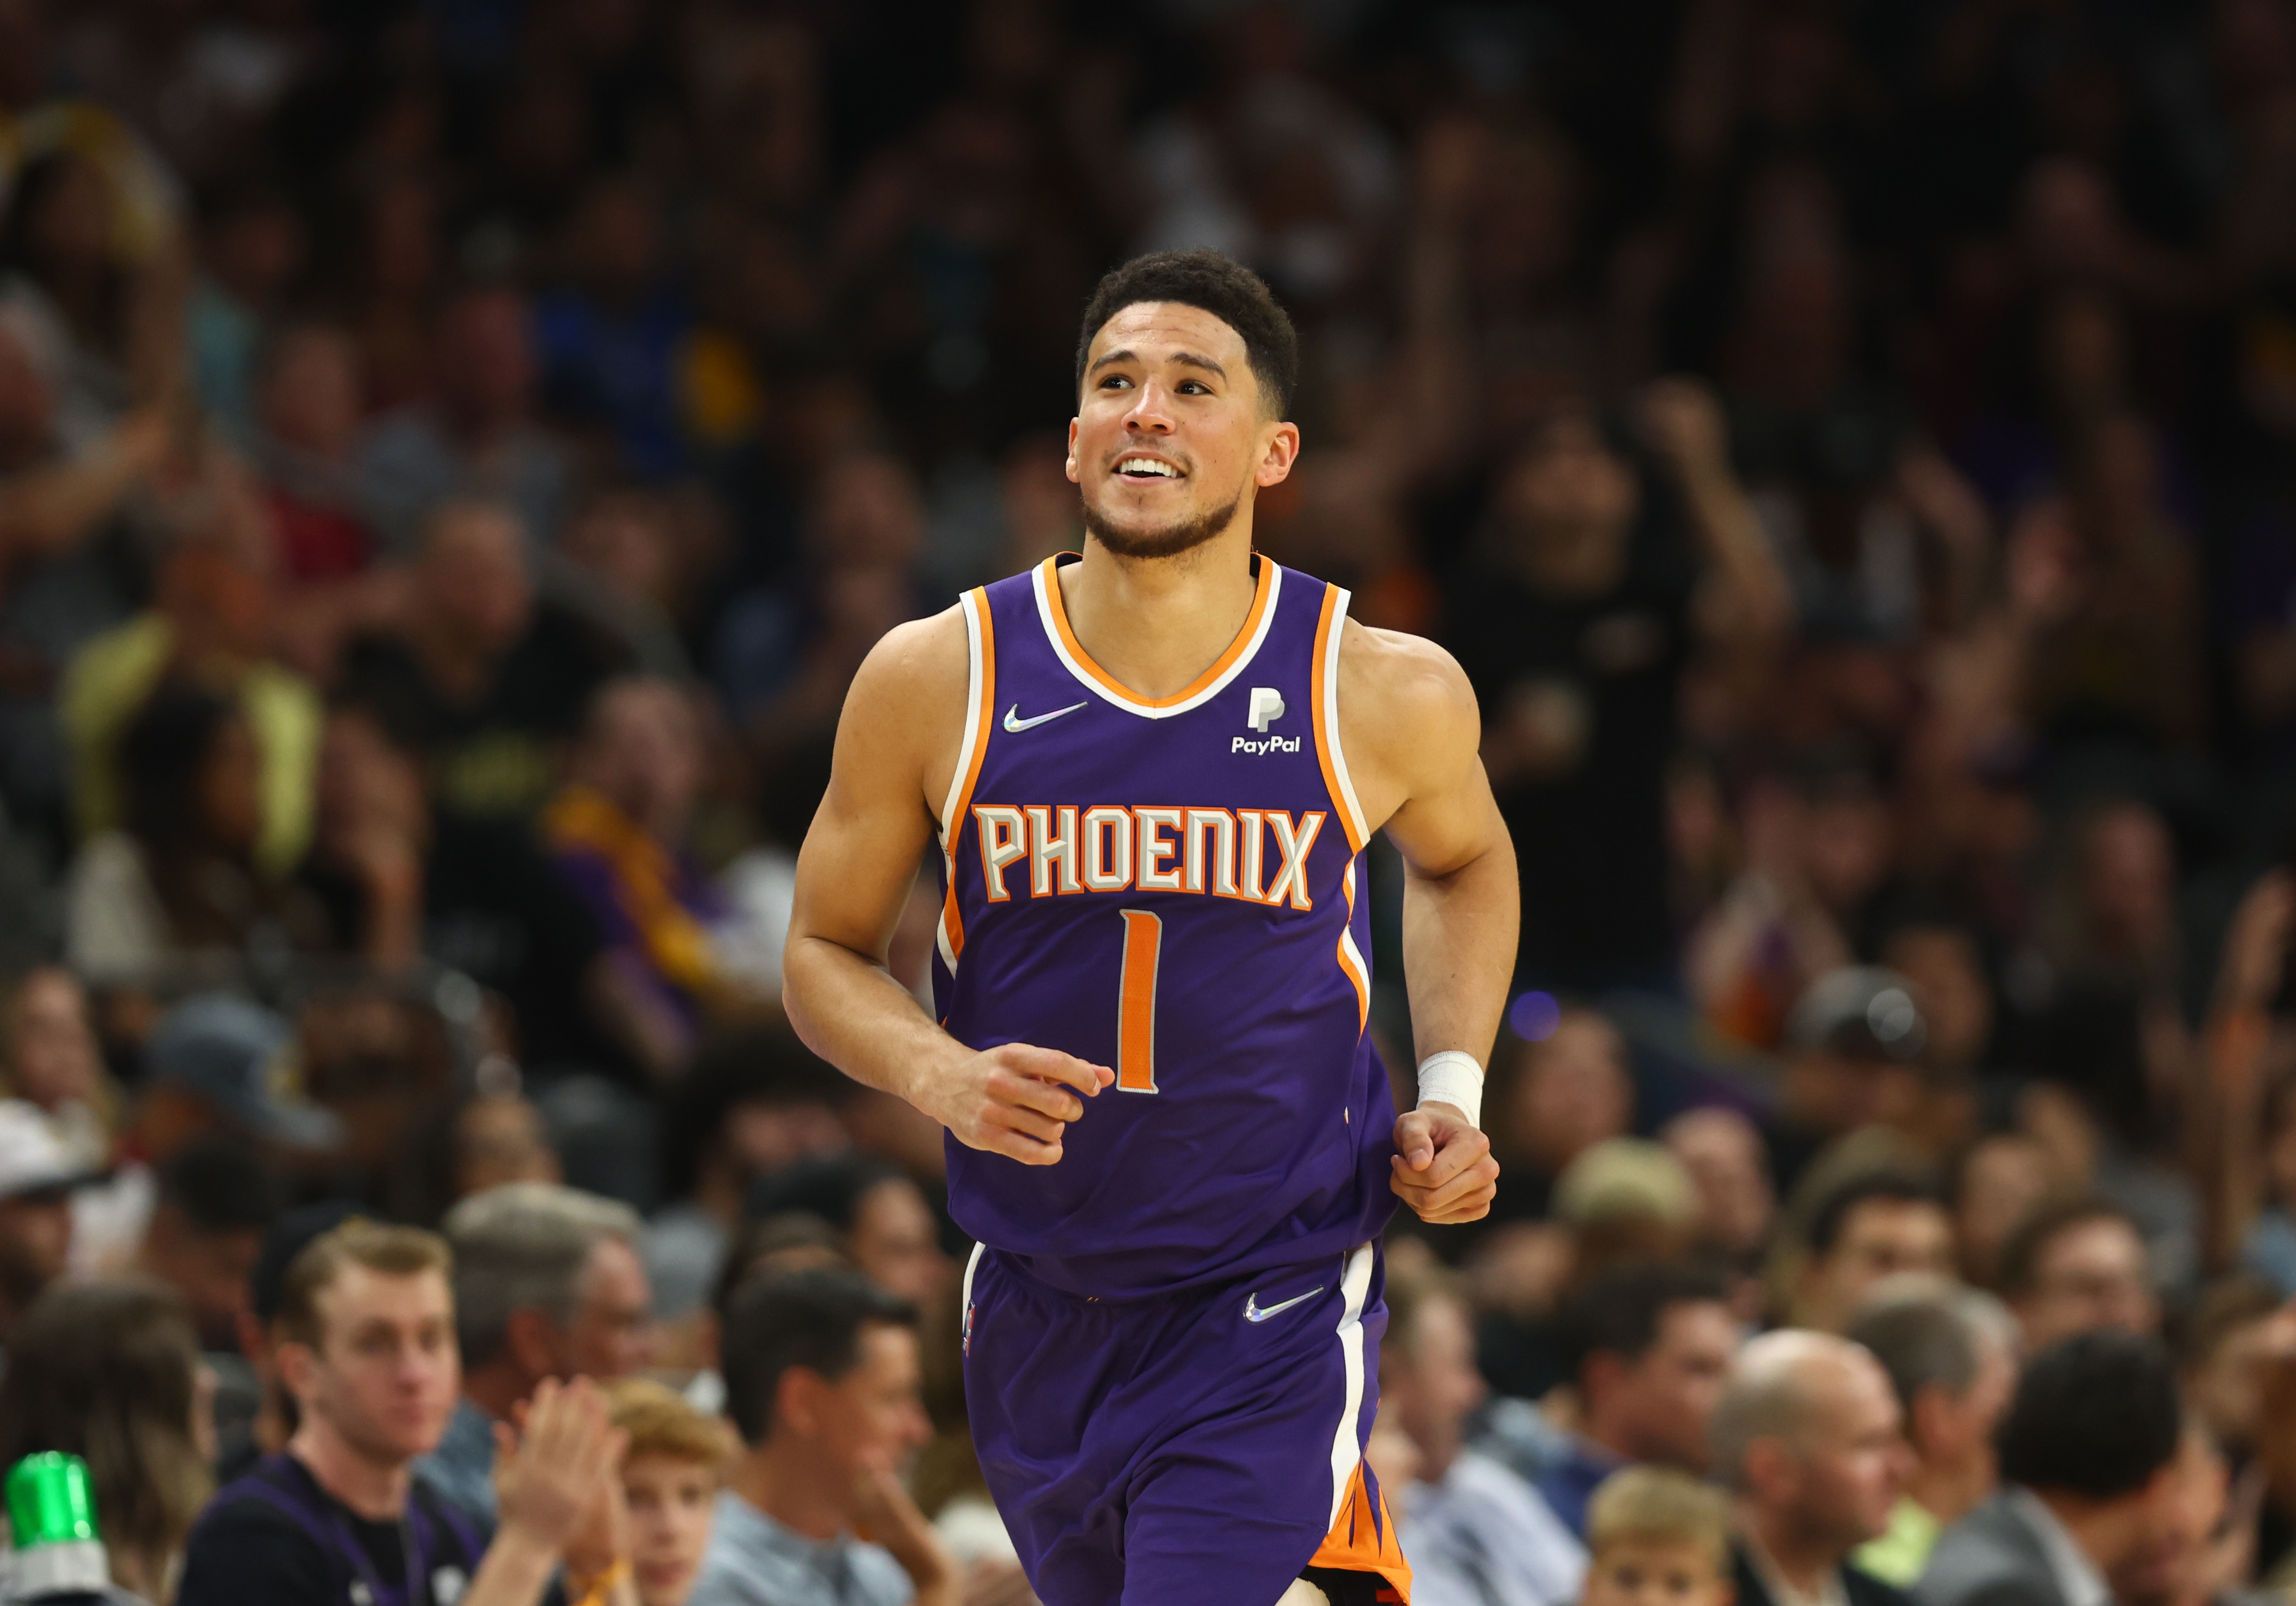 Phoenix Suns guard Devin Booker celebrates in the second half against the Los Angeles Lakers in the second half at Footprint Center.